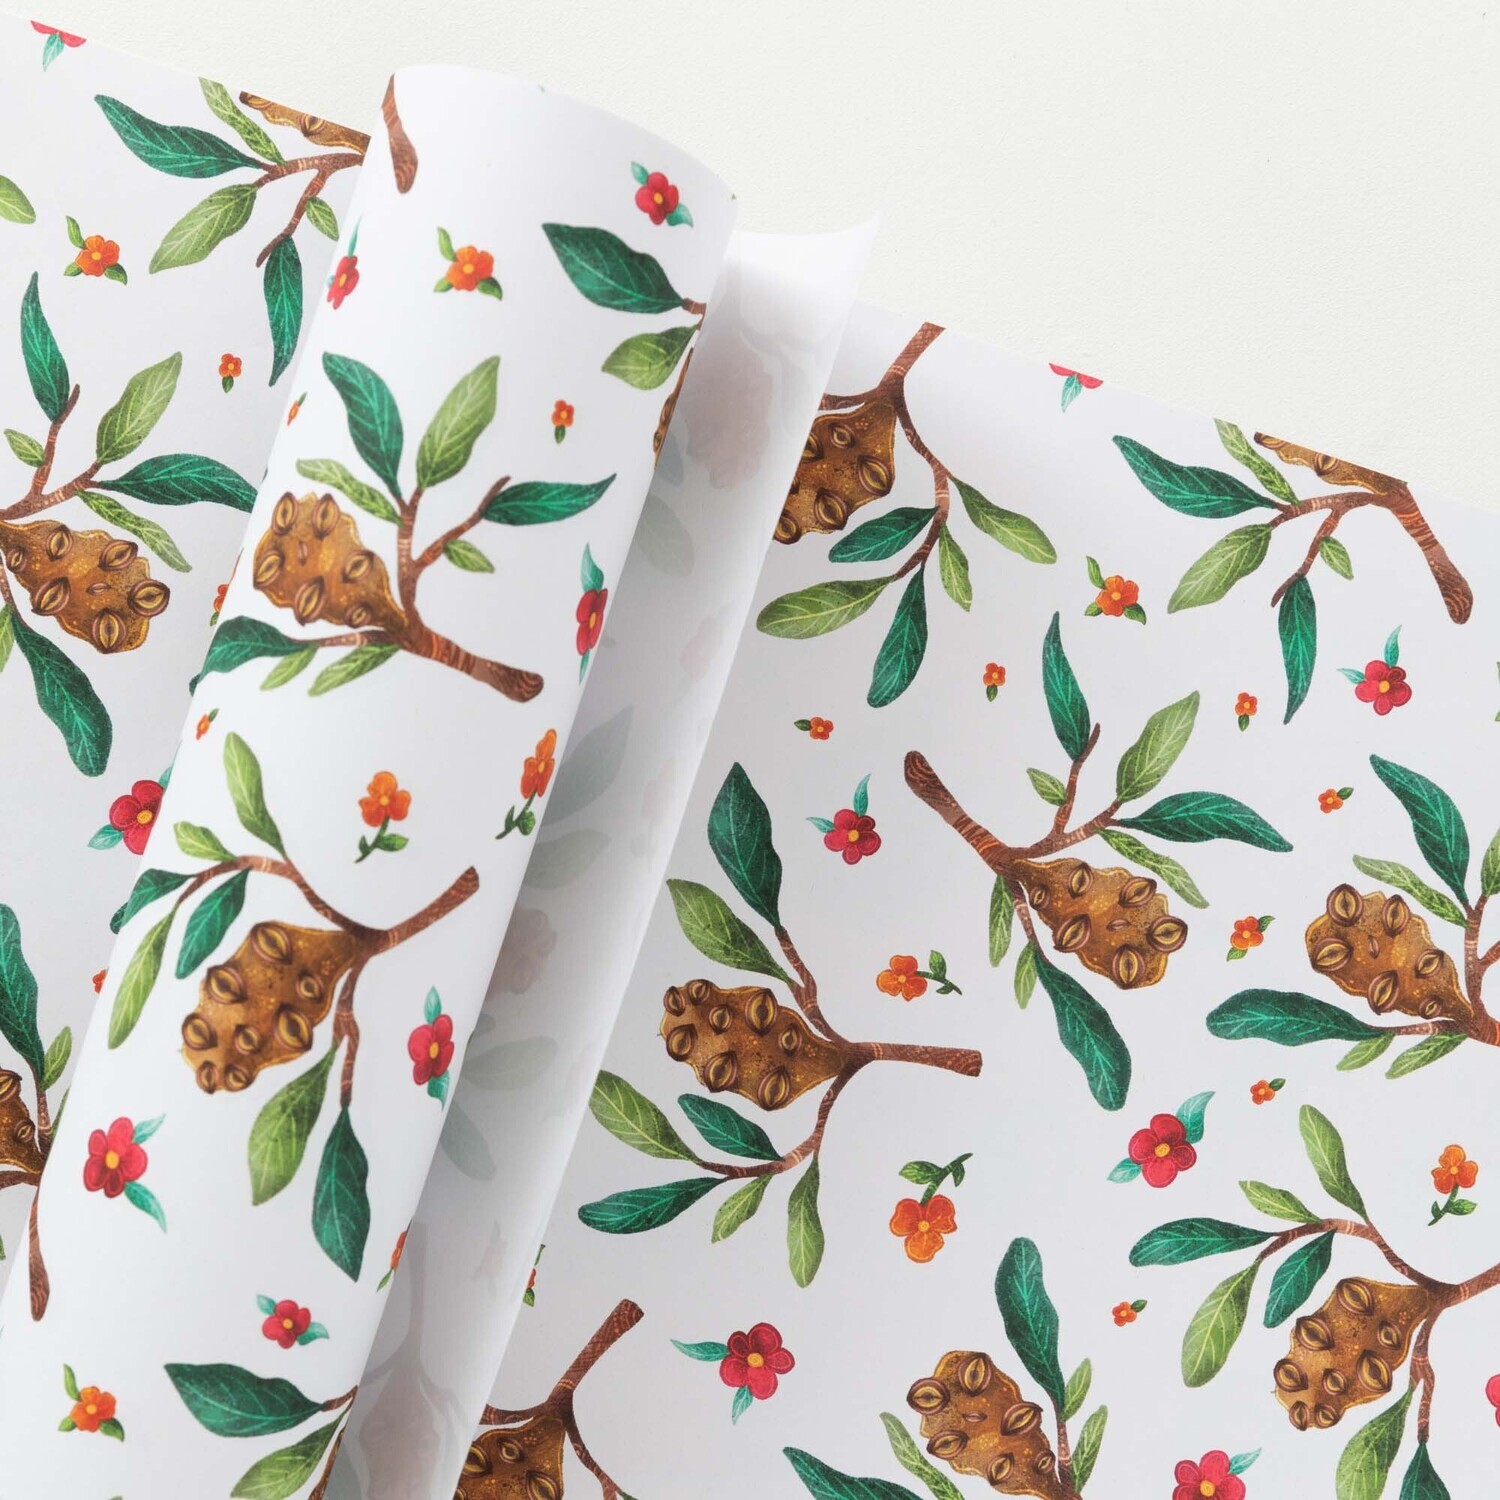 Australian banksia A2 recycled wrapping paper